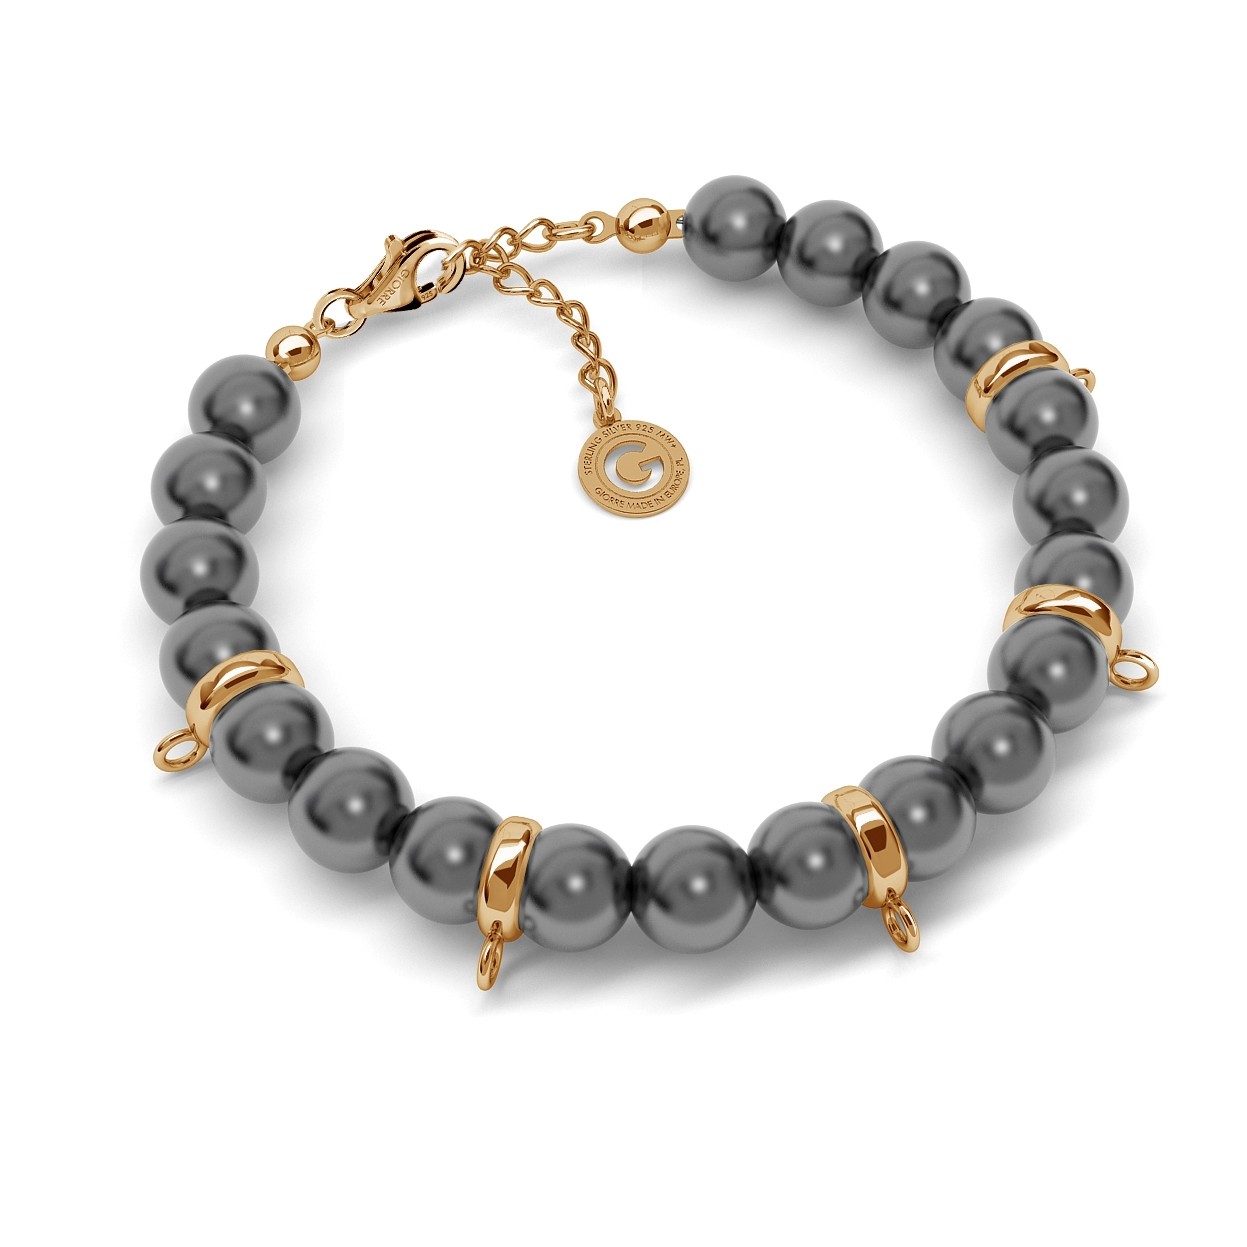 BRACELET WITH PEARLS, SILVER 925, RHODIUM OR GOLD PLATED